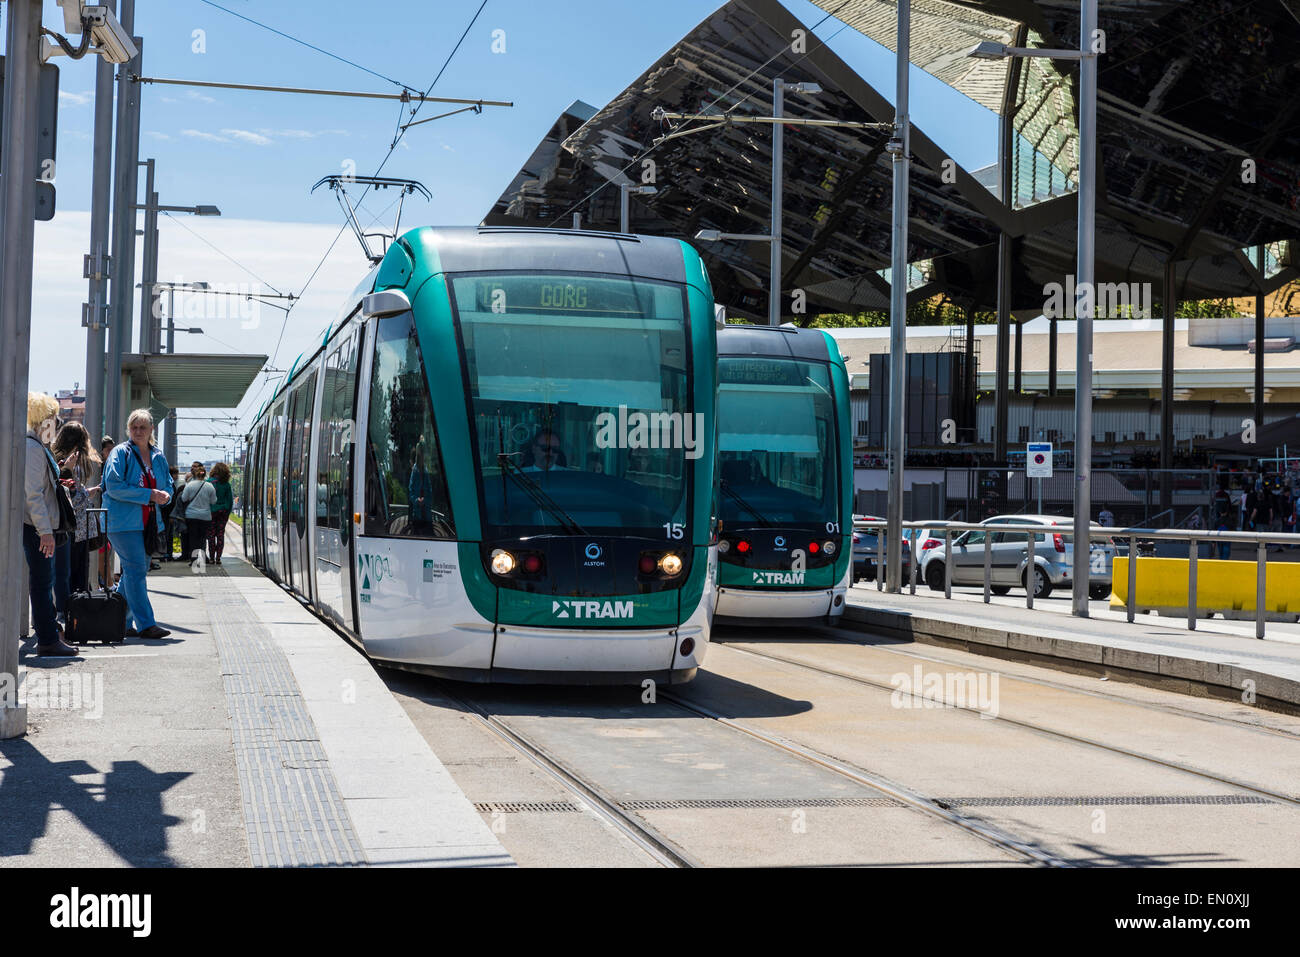 Barcelona tram known as Trambaix. In the picture the tram is stopped ahead of flea market Encants. Stock Photo